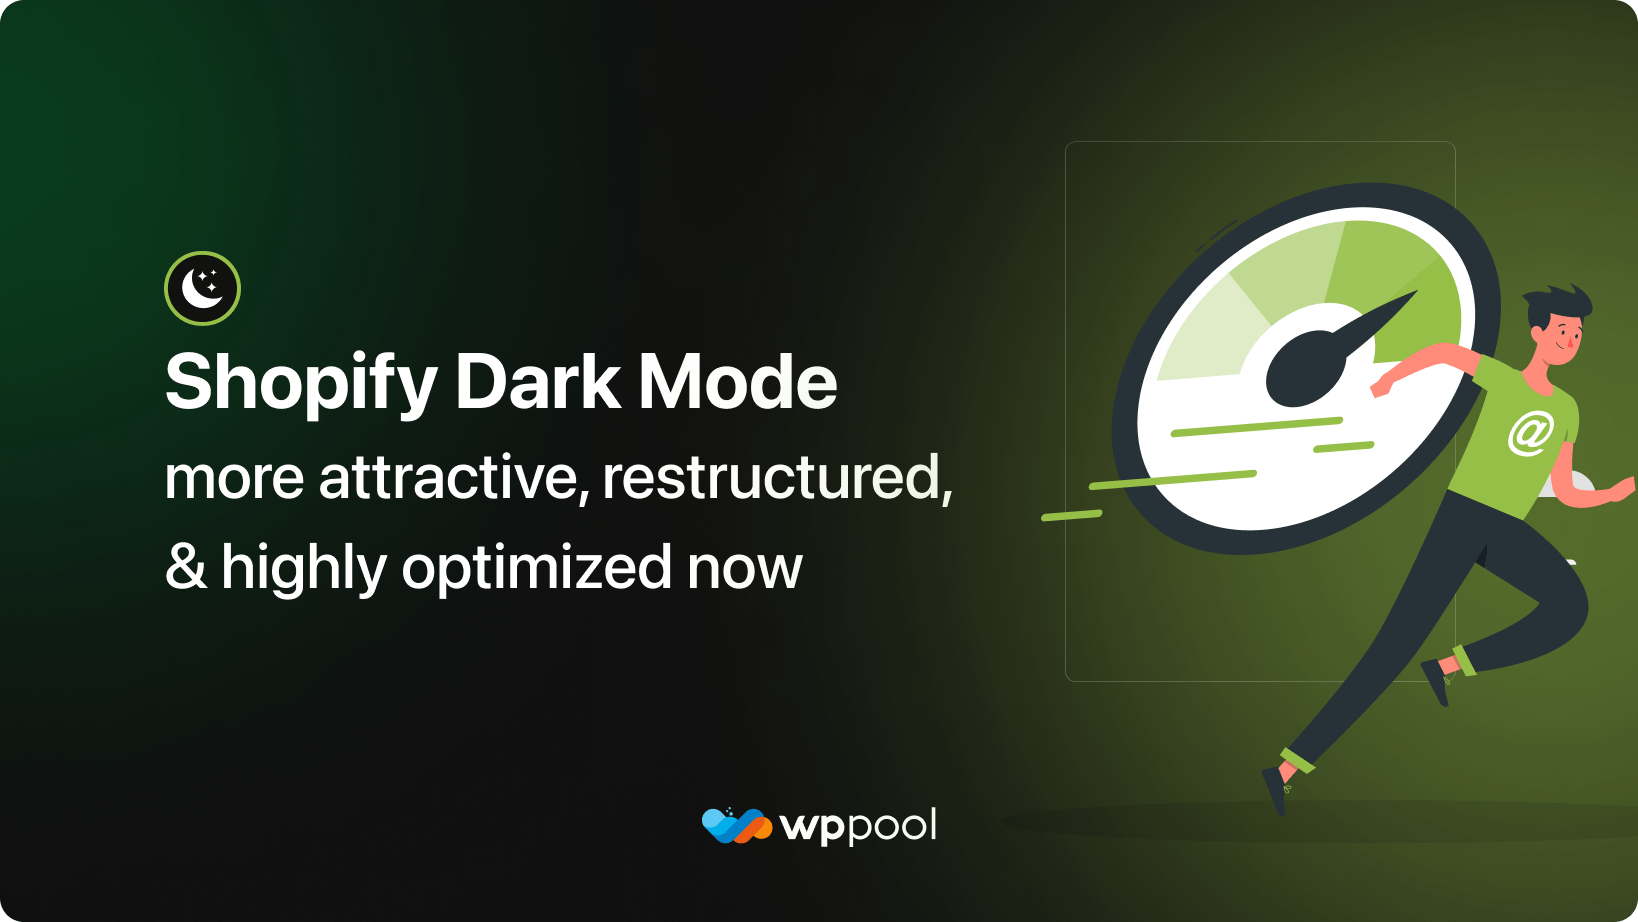 Shopify Dark Mode - more attractive, restructured, and highly optimized now!